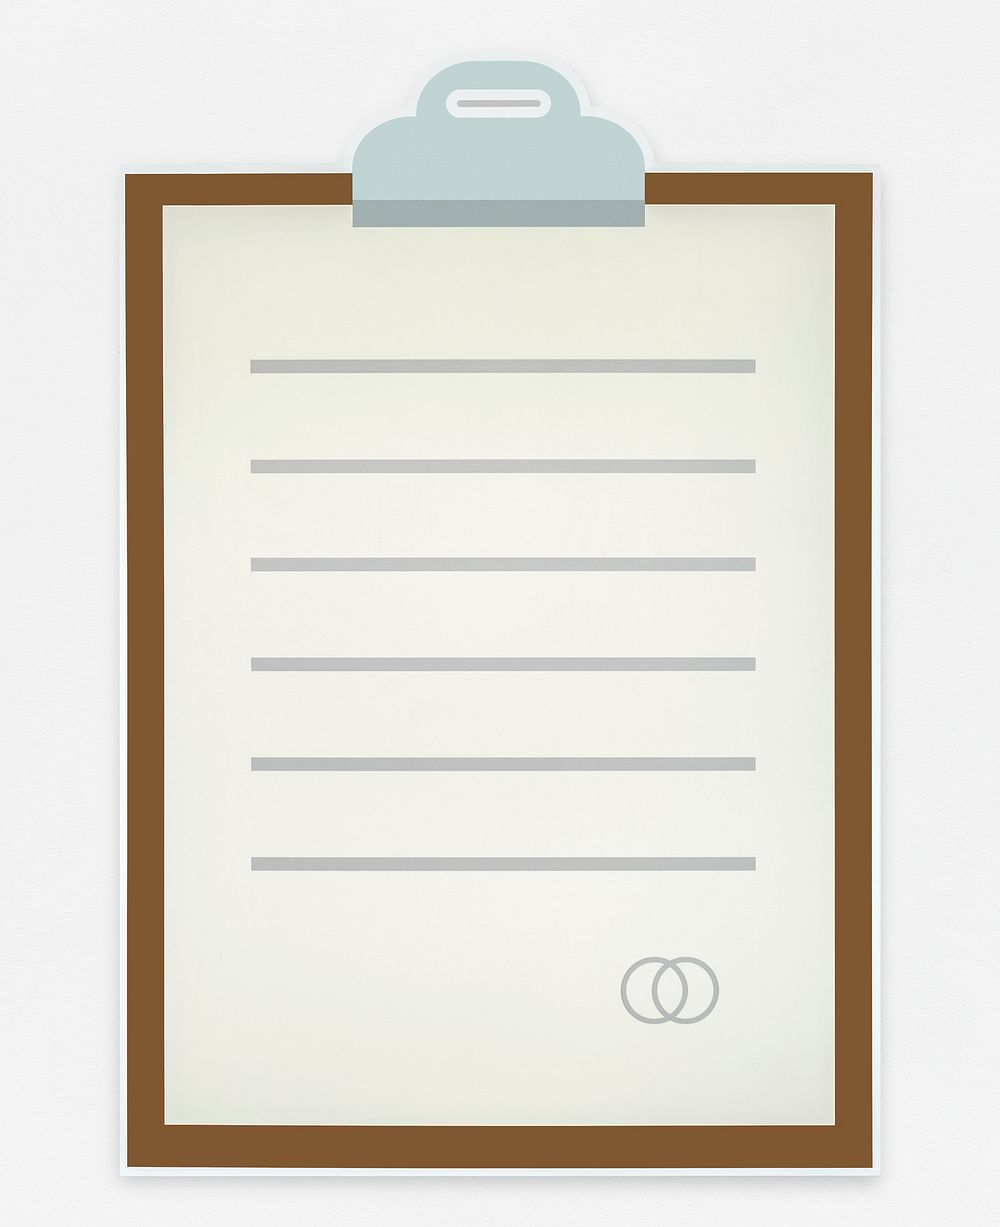 Clipboard icon isolated on a background